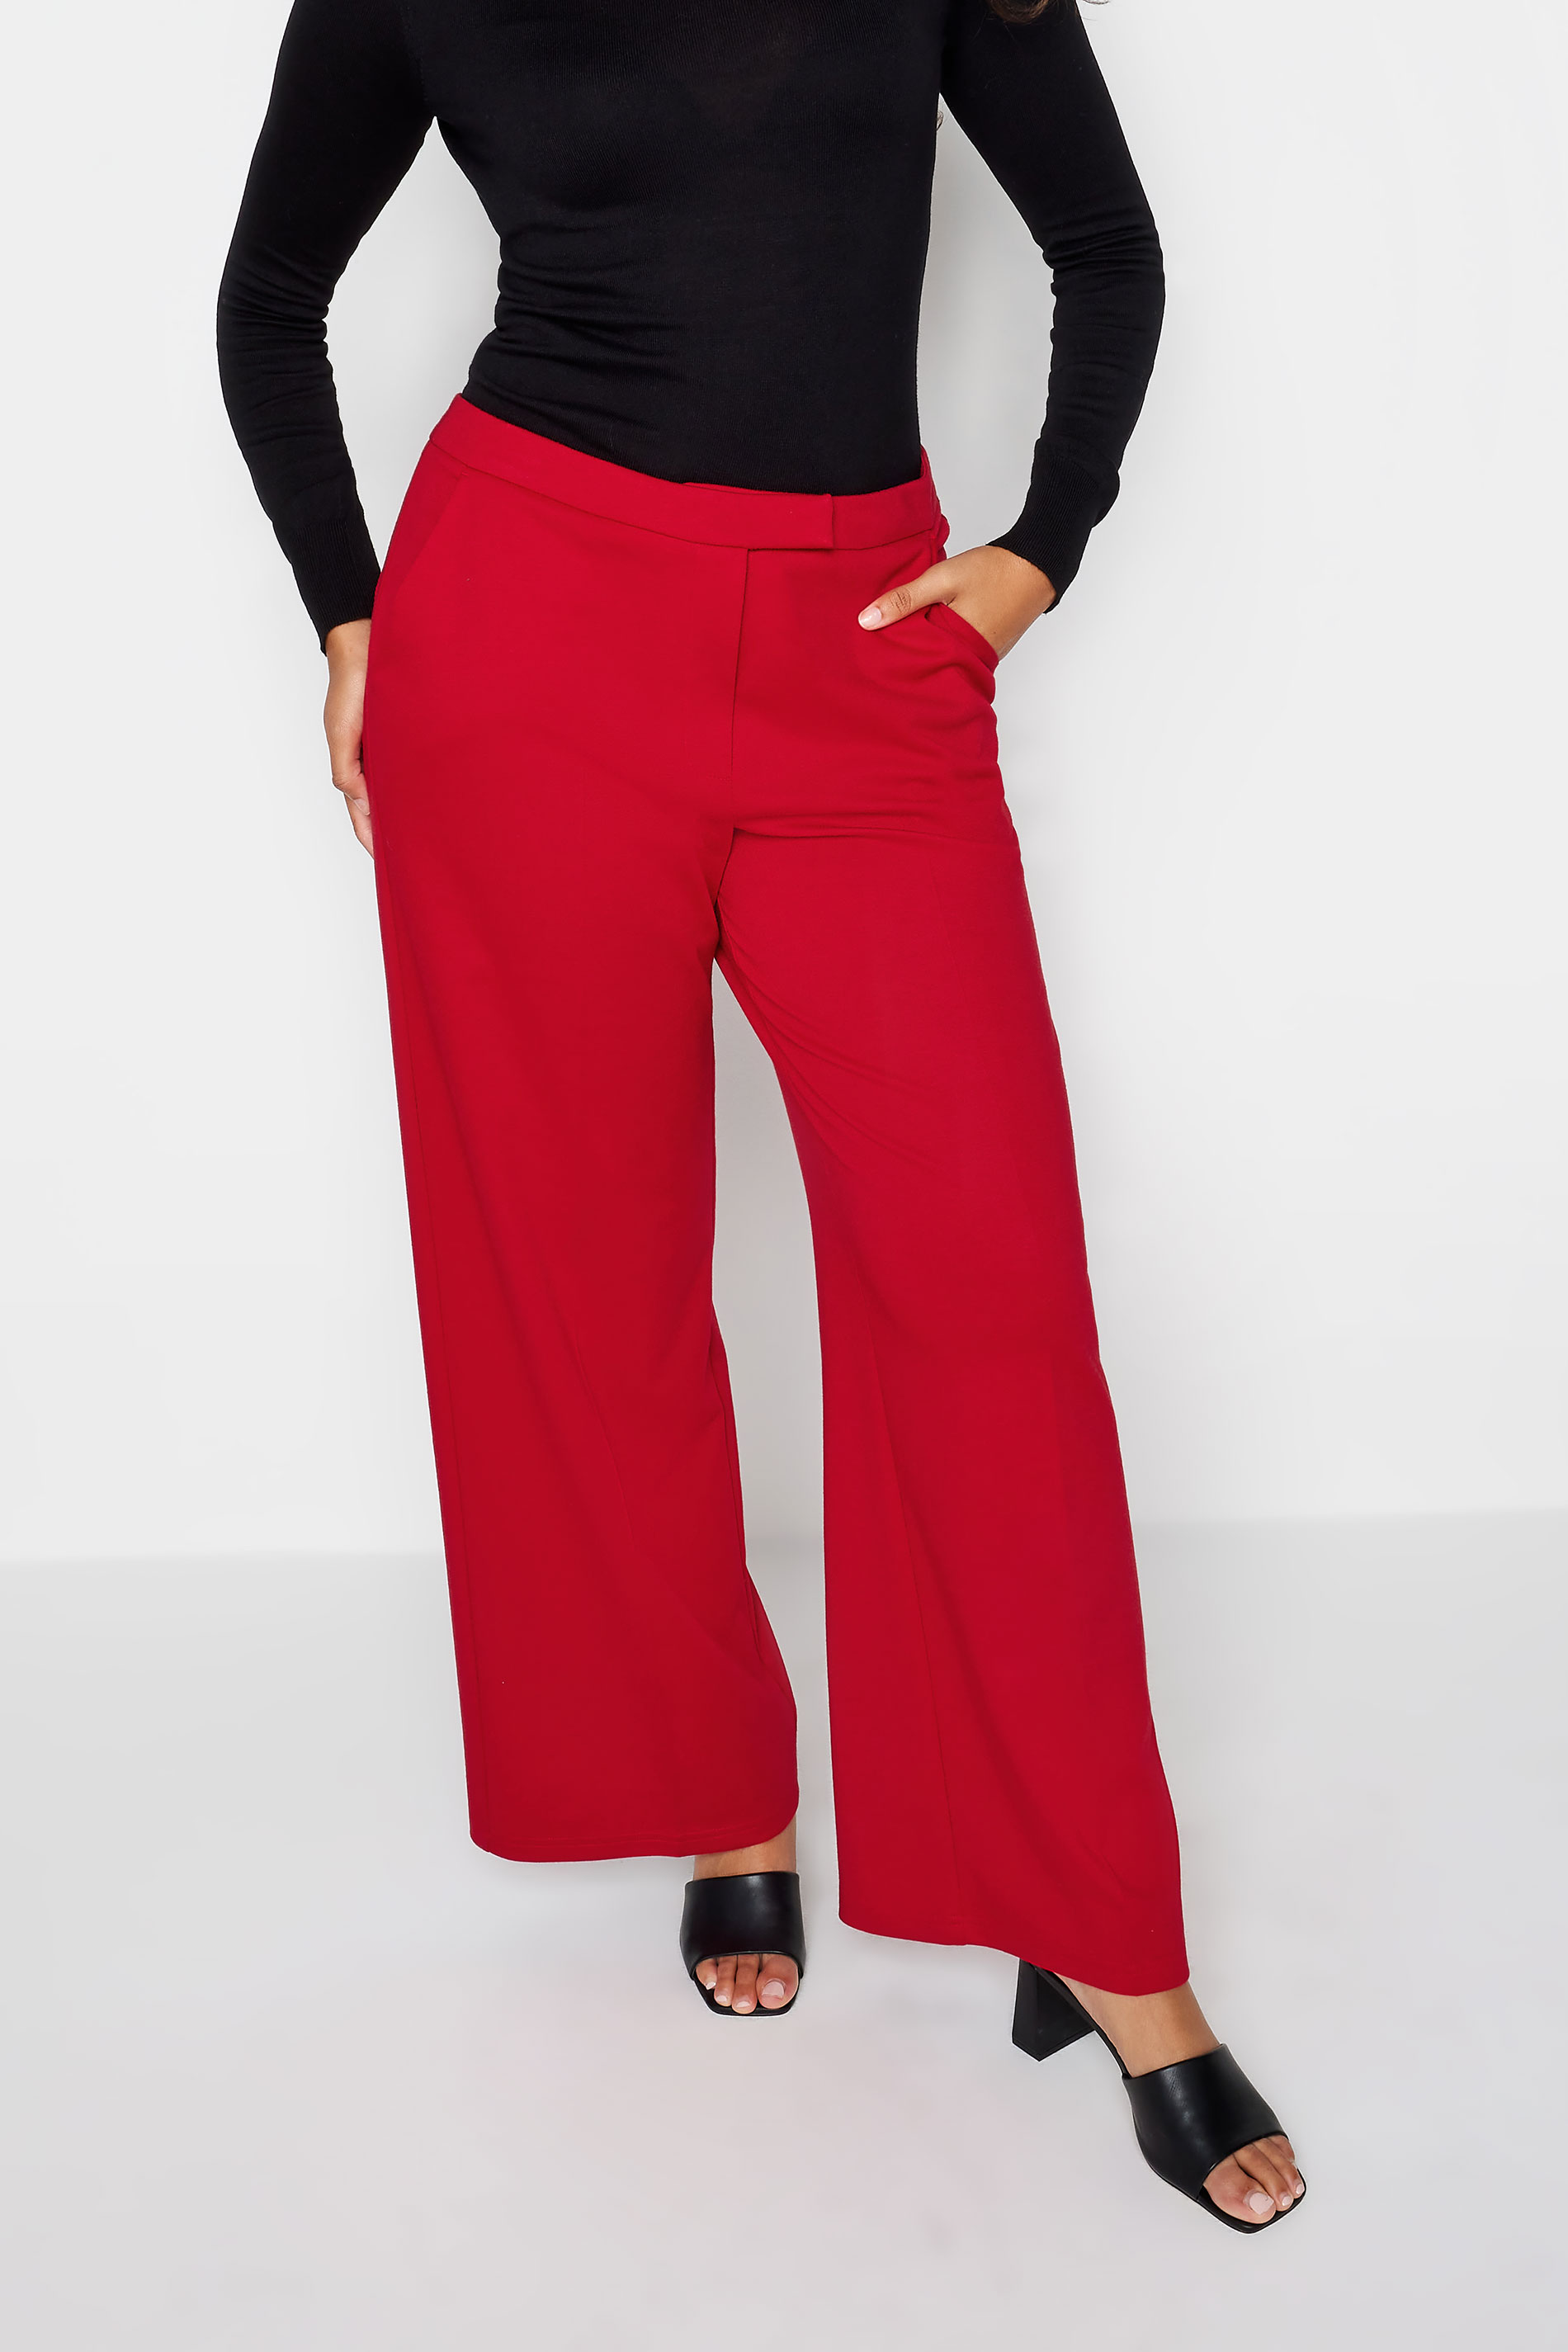 M&Co Red Ponte Wide Leg Trousers | M&Co 1